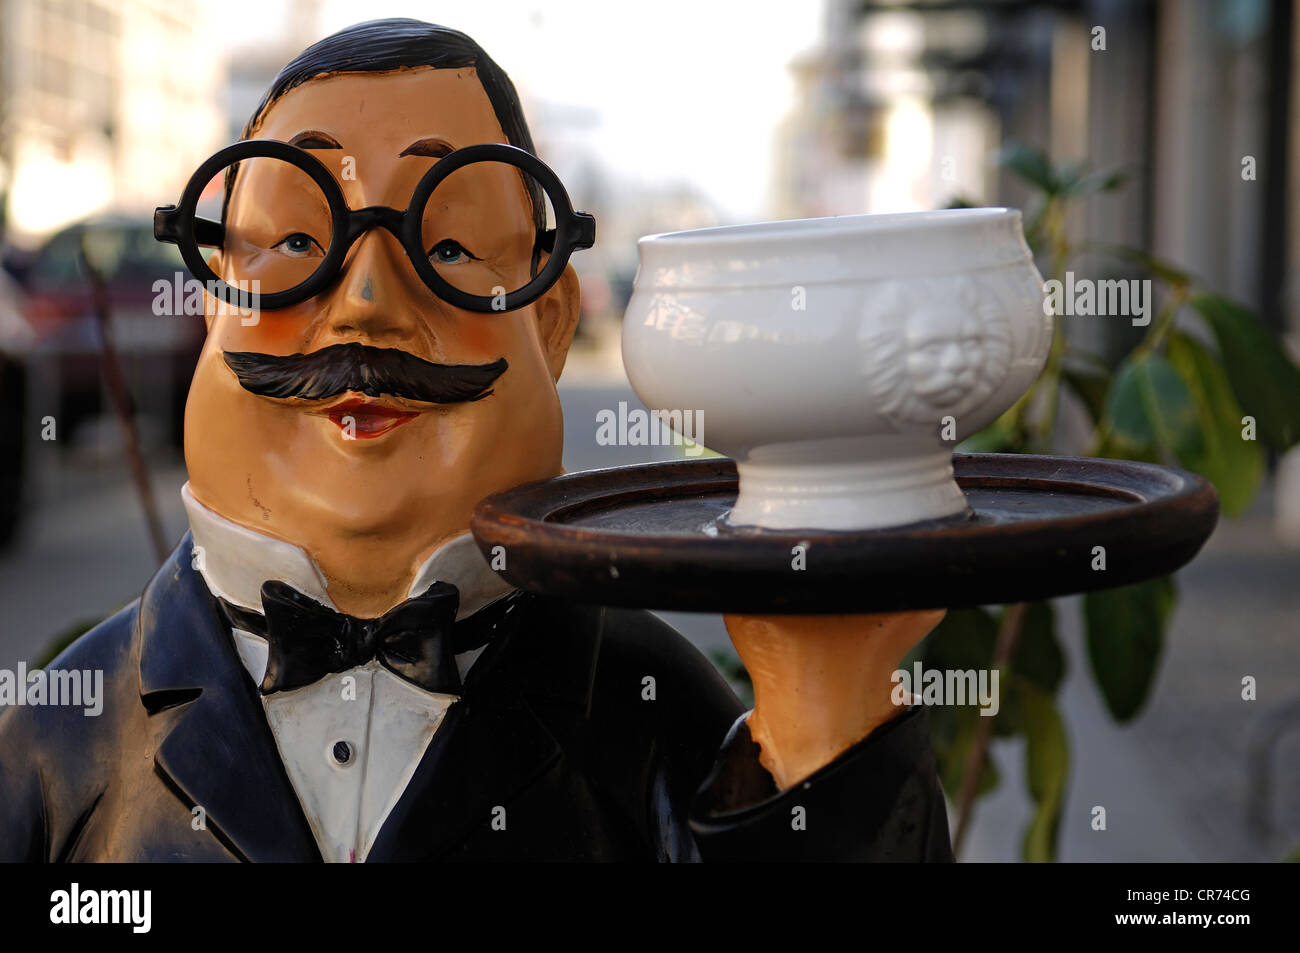 Butler figure carrying a soup bowl on a tray in front of a café, Freiburg, Baden-Wuerttemberg, Germany, Europe Stock Photo